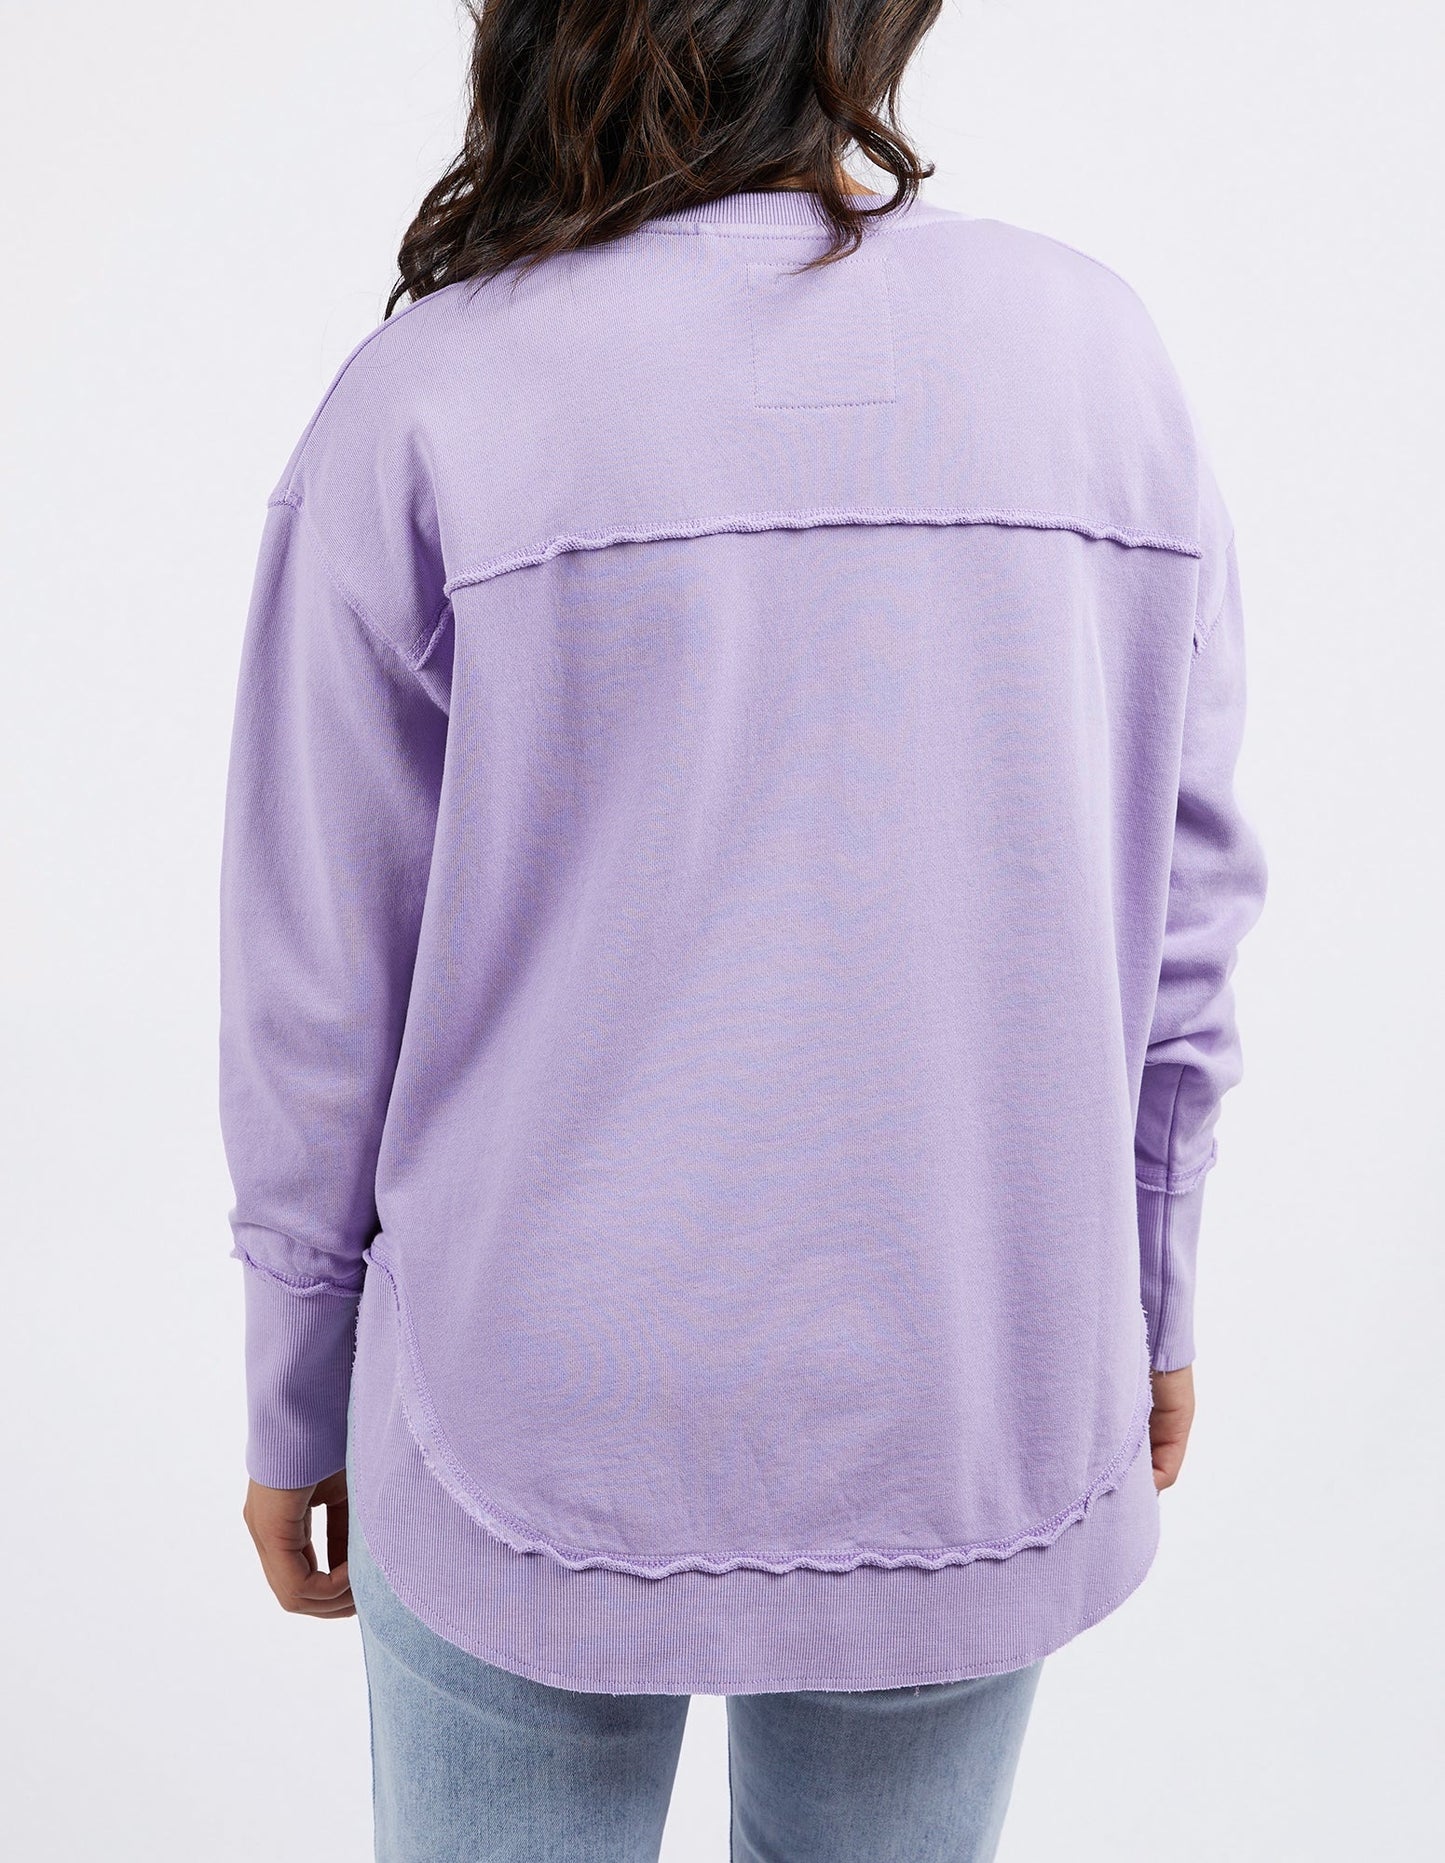 FOXWOOD SIMLIFIED CREW - LAVENDER - THE VOGUE STORE